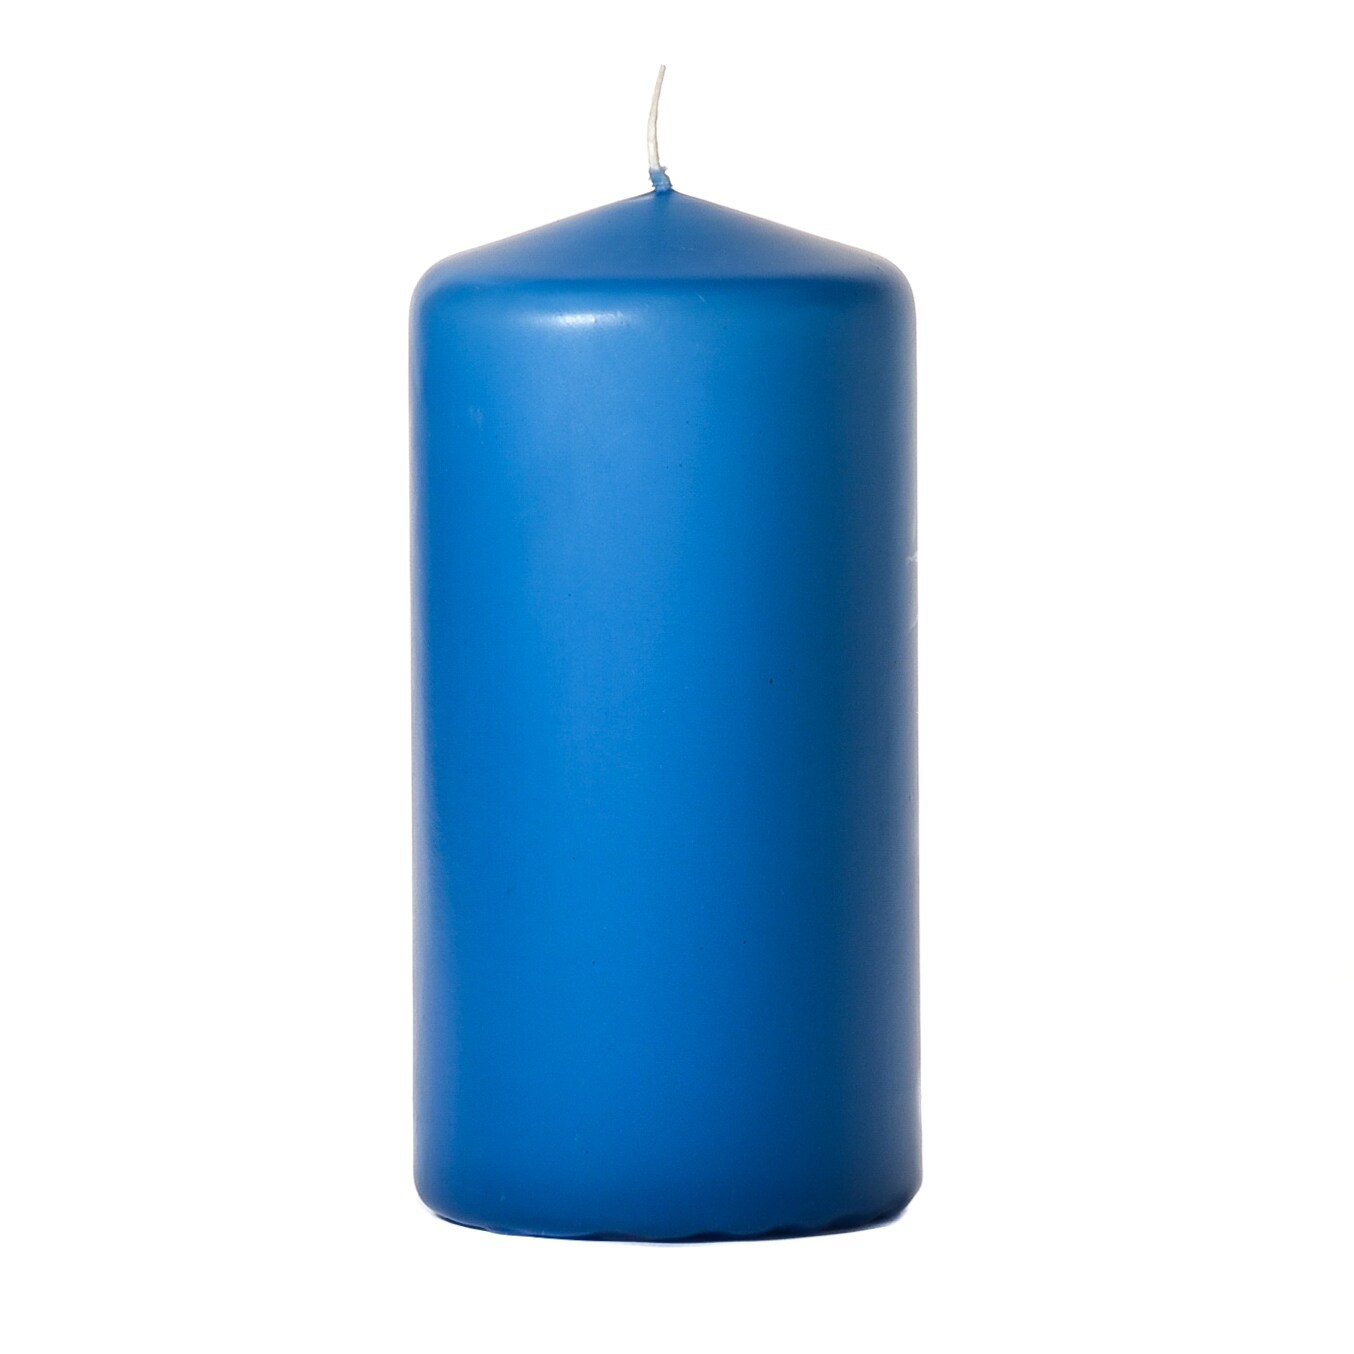 6 Pcs, 3x6 Colonial Blue Pillar Candles Unscented 3 in. diameterx6 in. tall - Colonial Blue